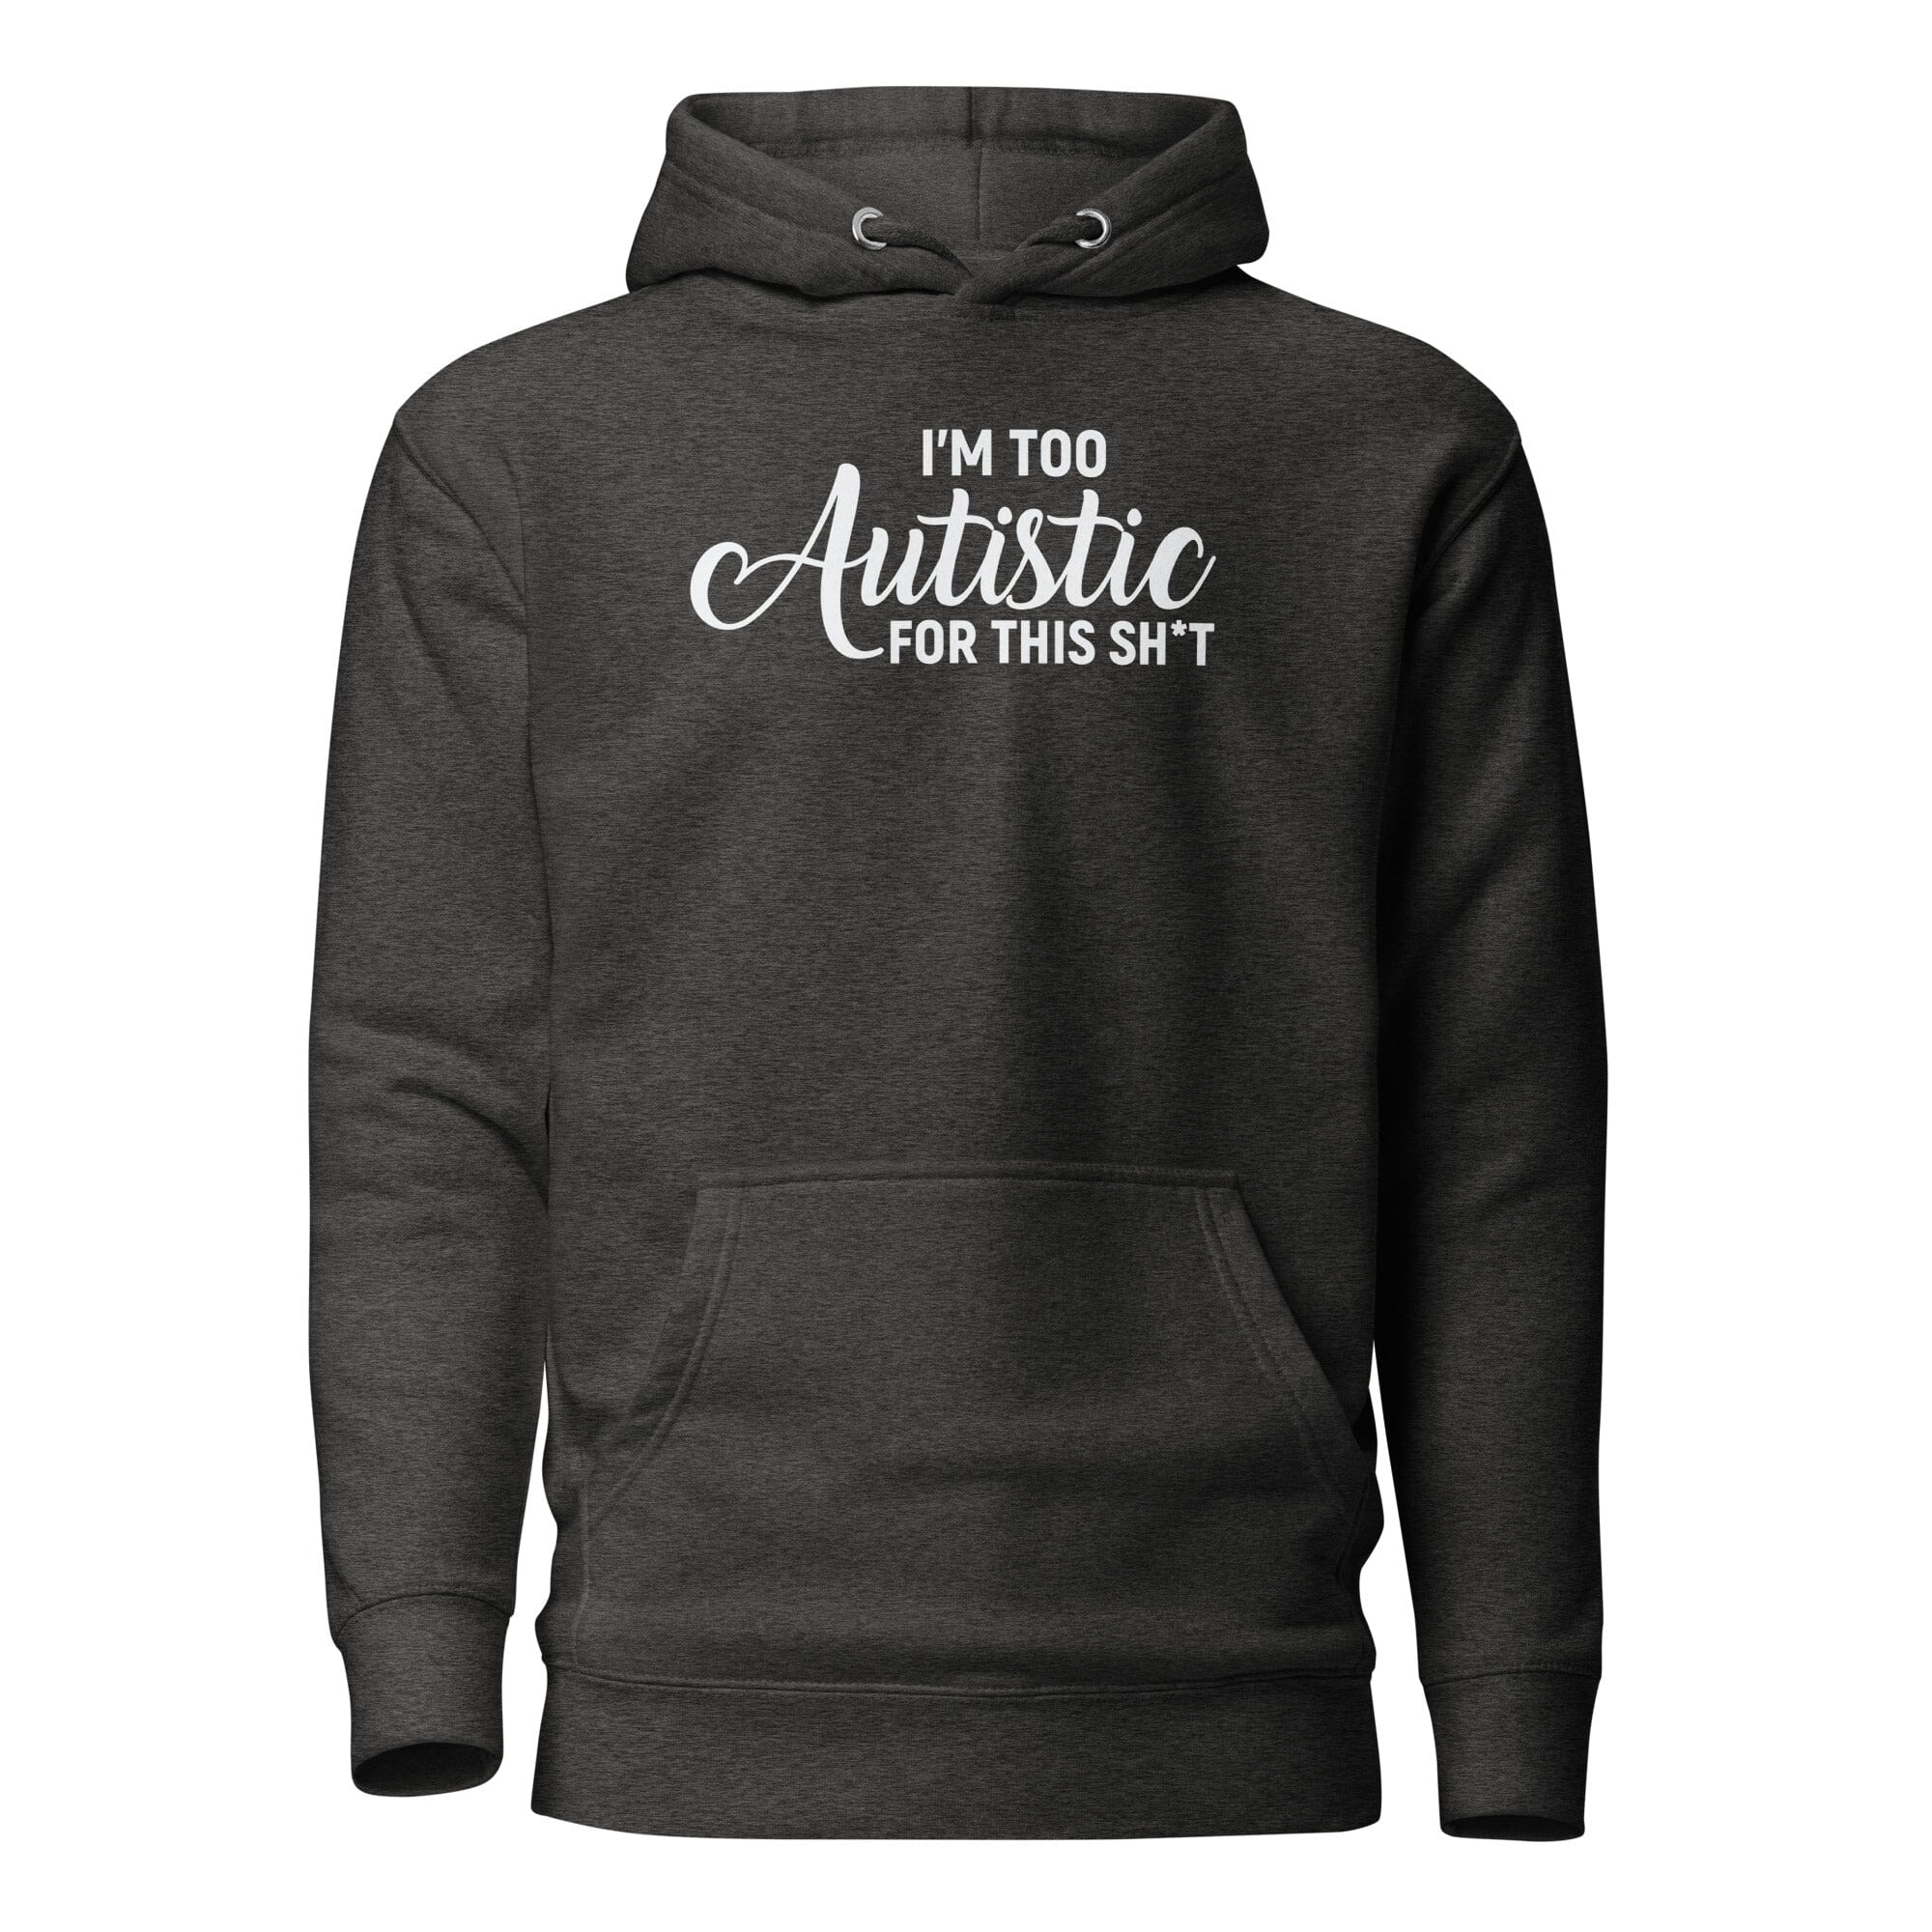 I'm Too Autistic for This Sh*t Unisex Hoodie The Autistic Innovator Charcoal Heather S 